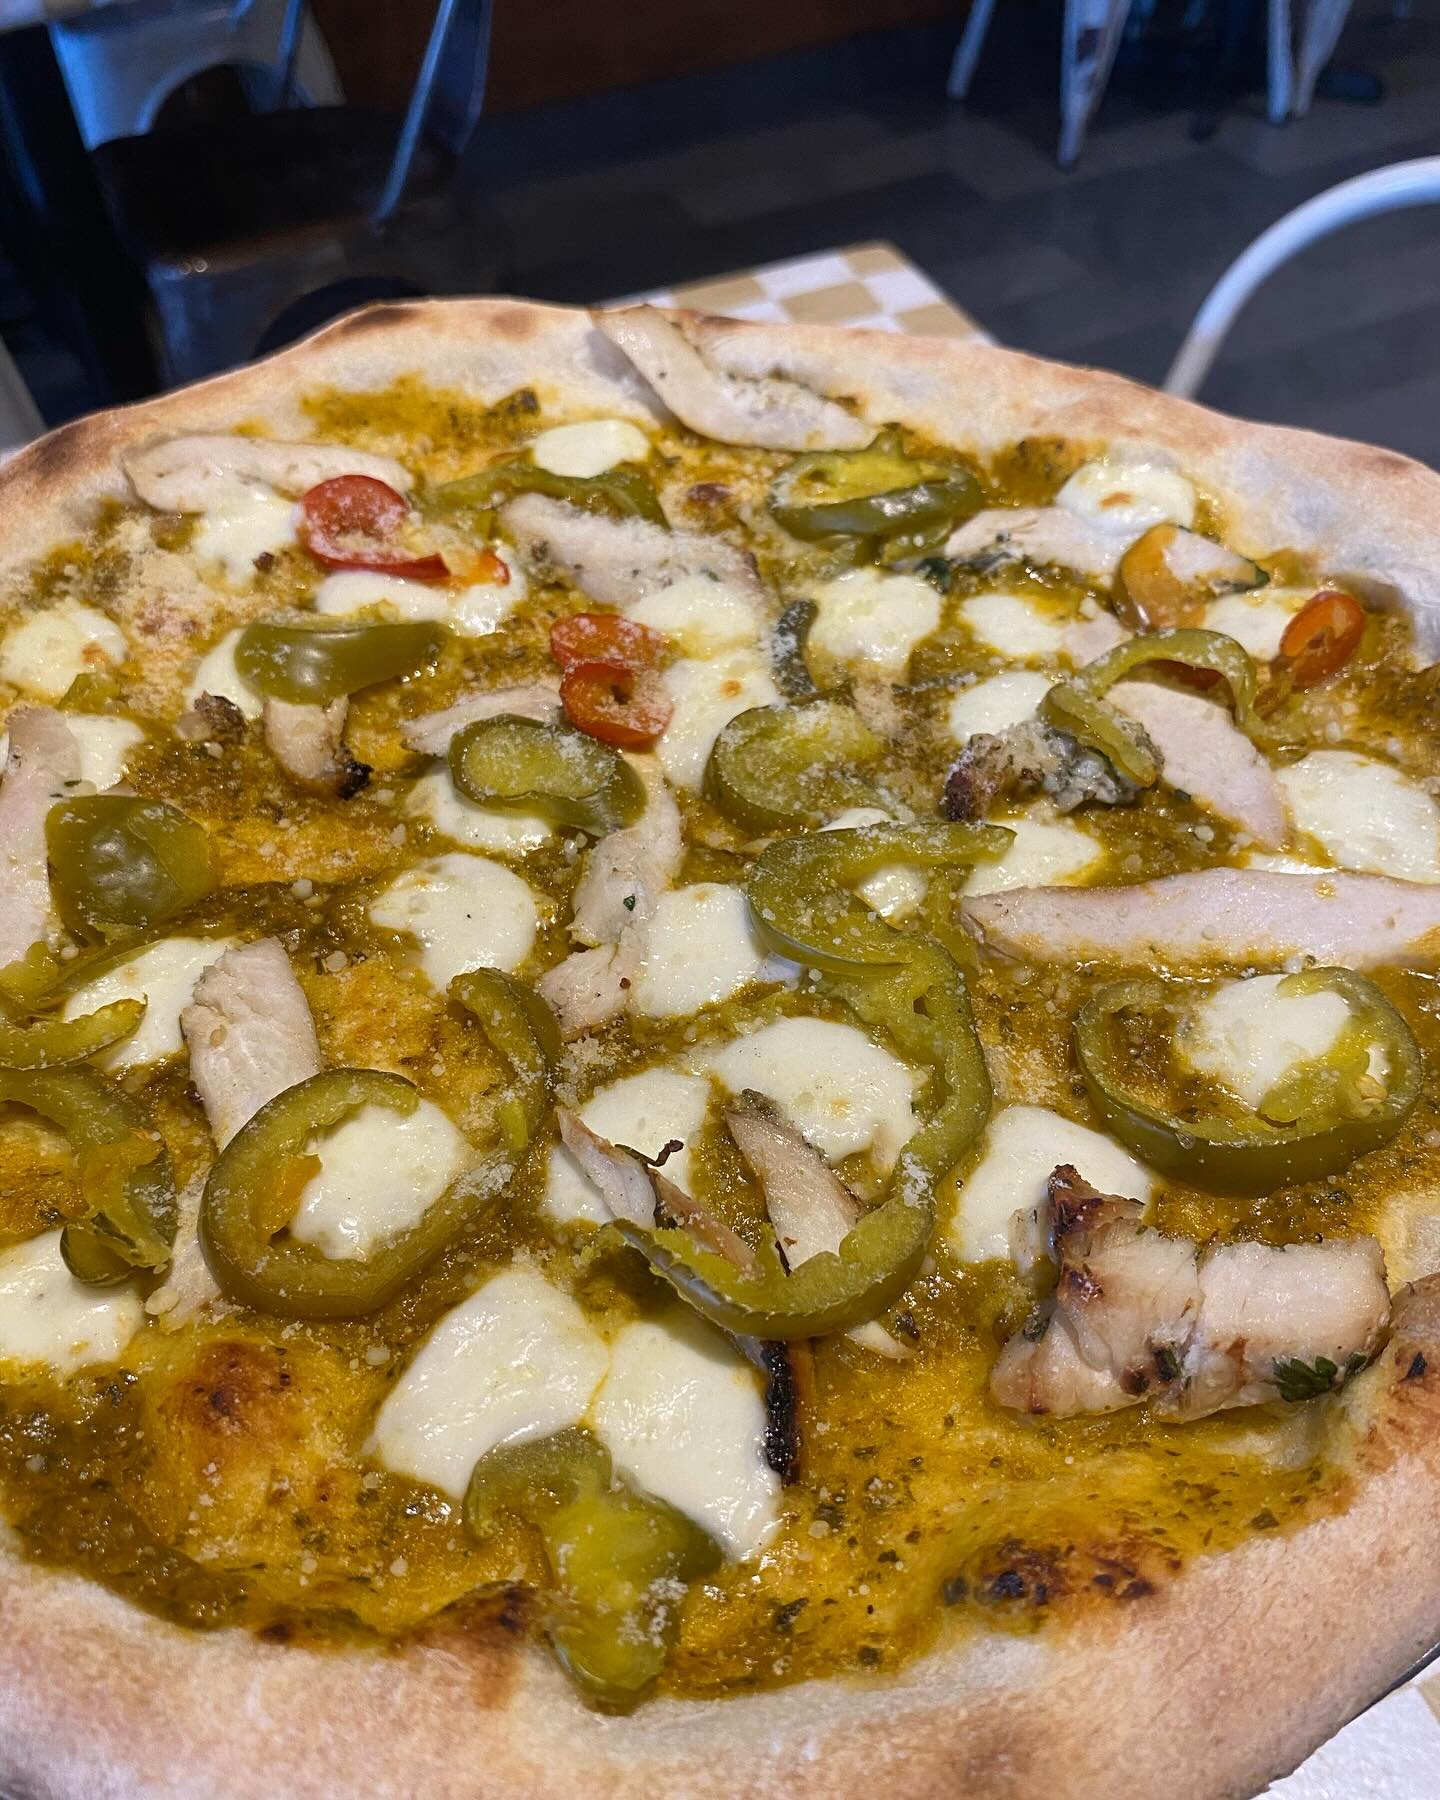 Special Specials!! The Cocktail has a lot going on, it&rsquo;s a bit of a play on an Italian Margarita with Tequila, Cherry, Basil, Lime and Amaretto. It&rsquo;s a sipper! 

The Pizza of the Day has Chicken, Pesto, Hot Cherry Peppers and Pearl Mozzar